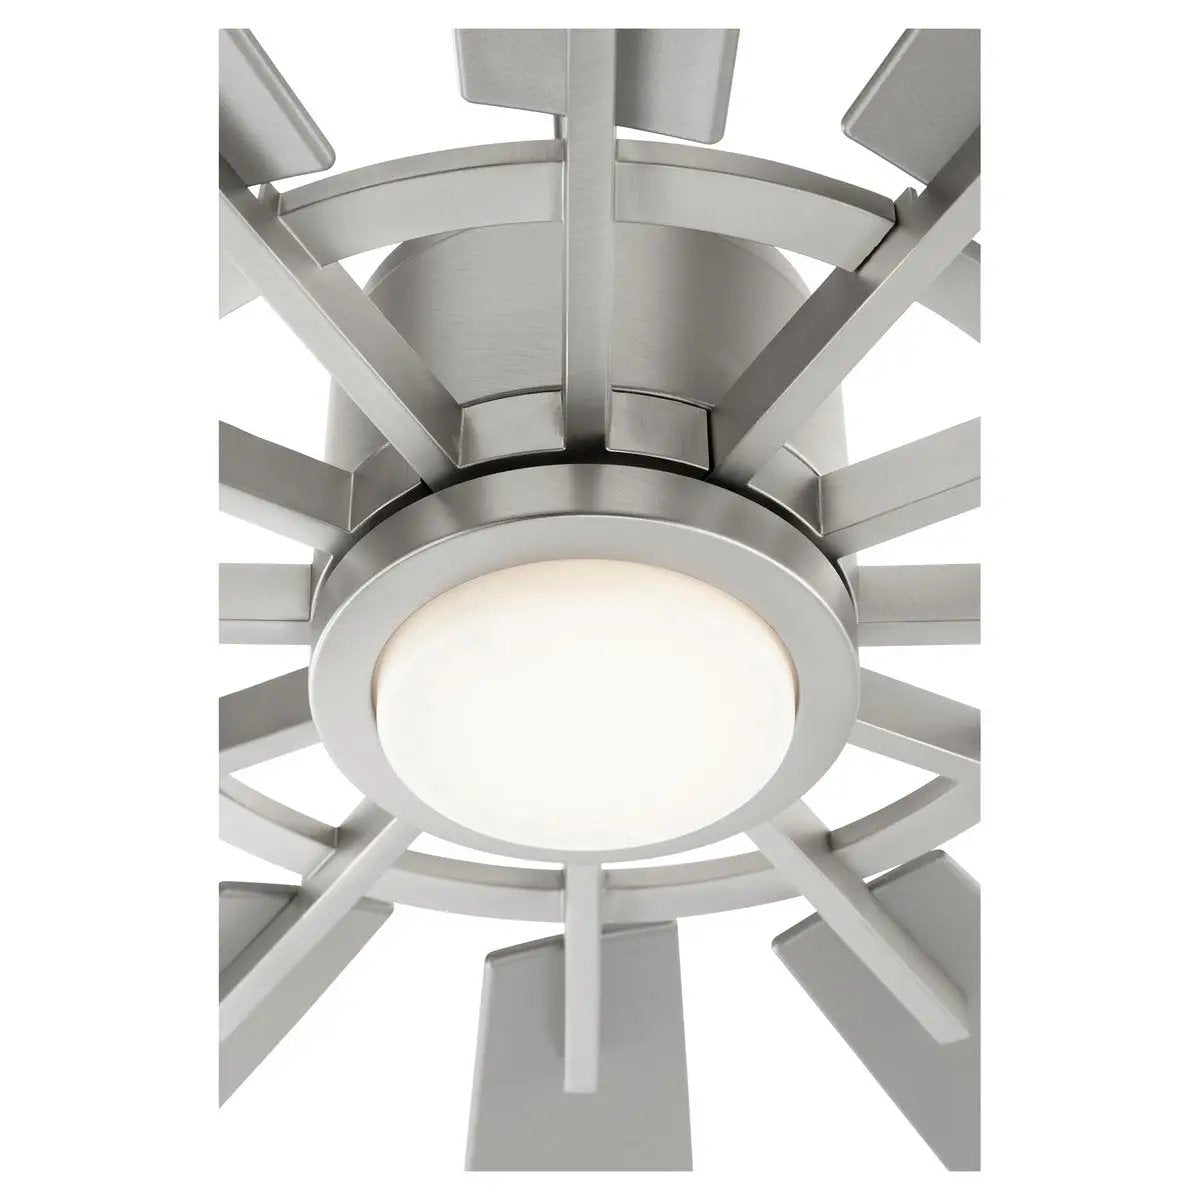 Outdoor Ceiling Fan with Light, a close-up of a multi-blade system attached to a dark chromatic housing motor and iron elements. Designed for high performance outdoor air circulation. 60" blade span, 12 blades, 6-speeds. UL Listed, Damp Location safety rating. LED light kit included.